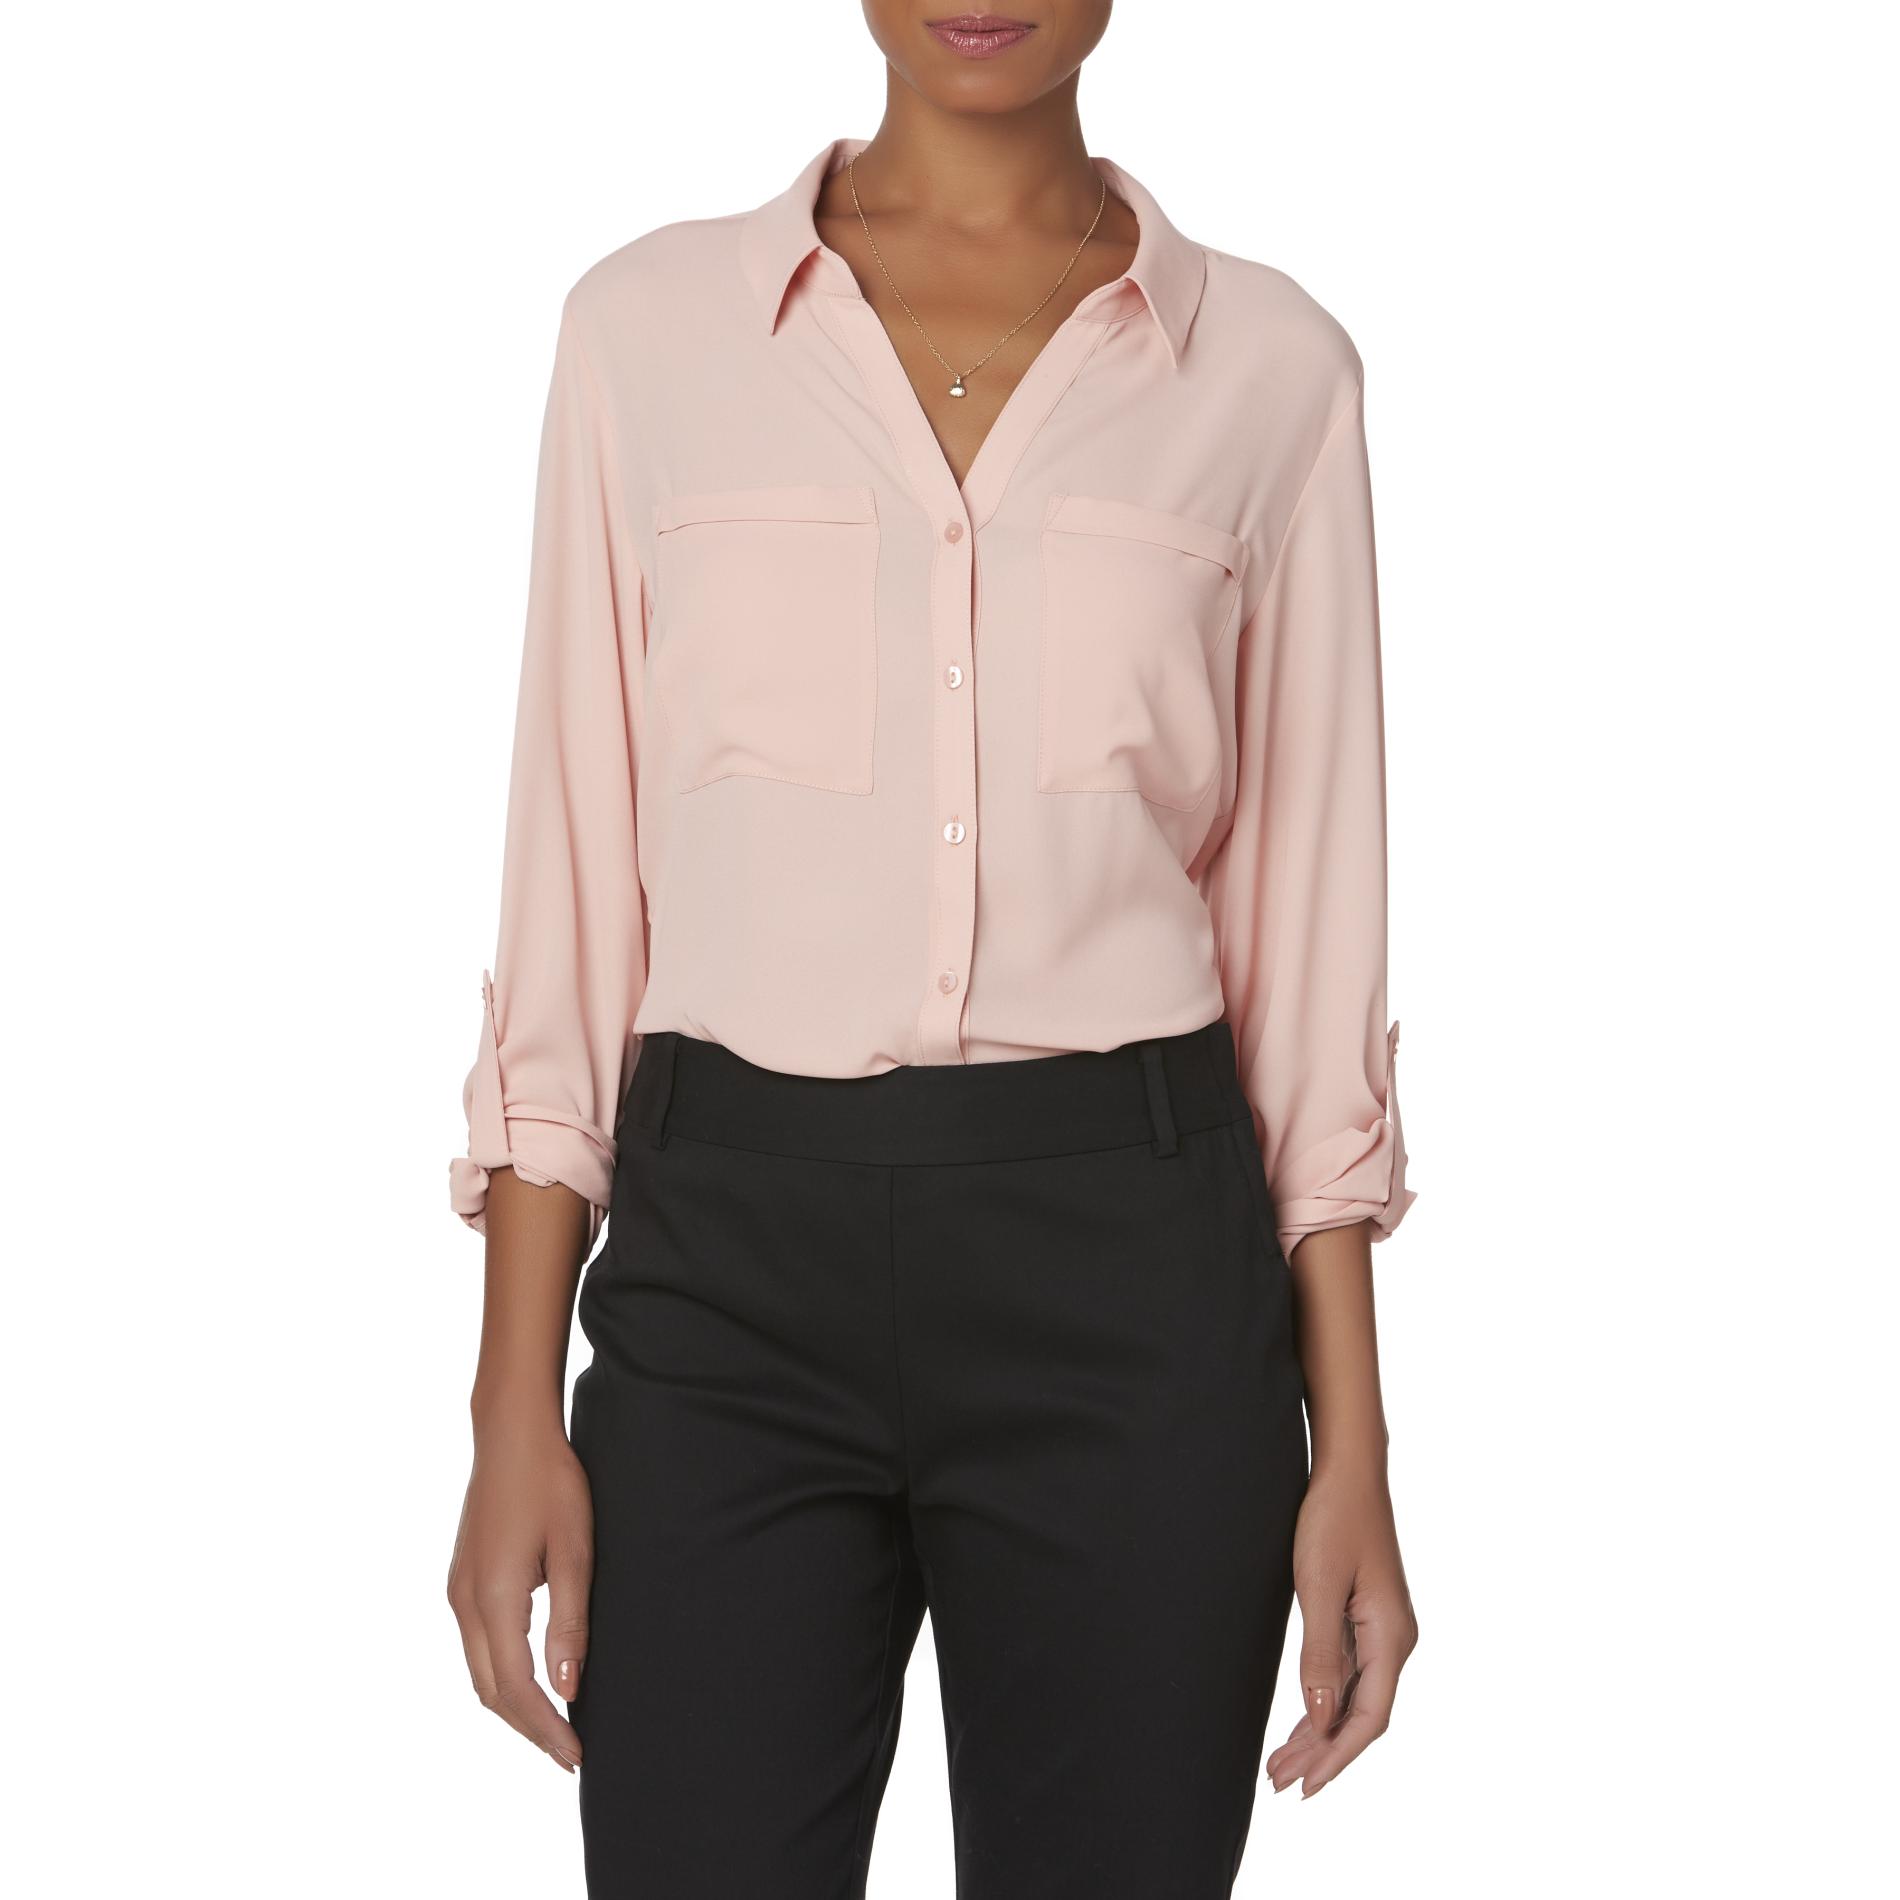 Simply Styled Women's Blouse